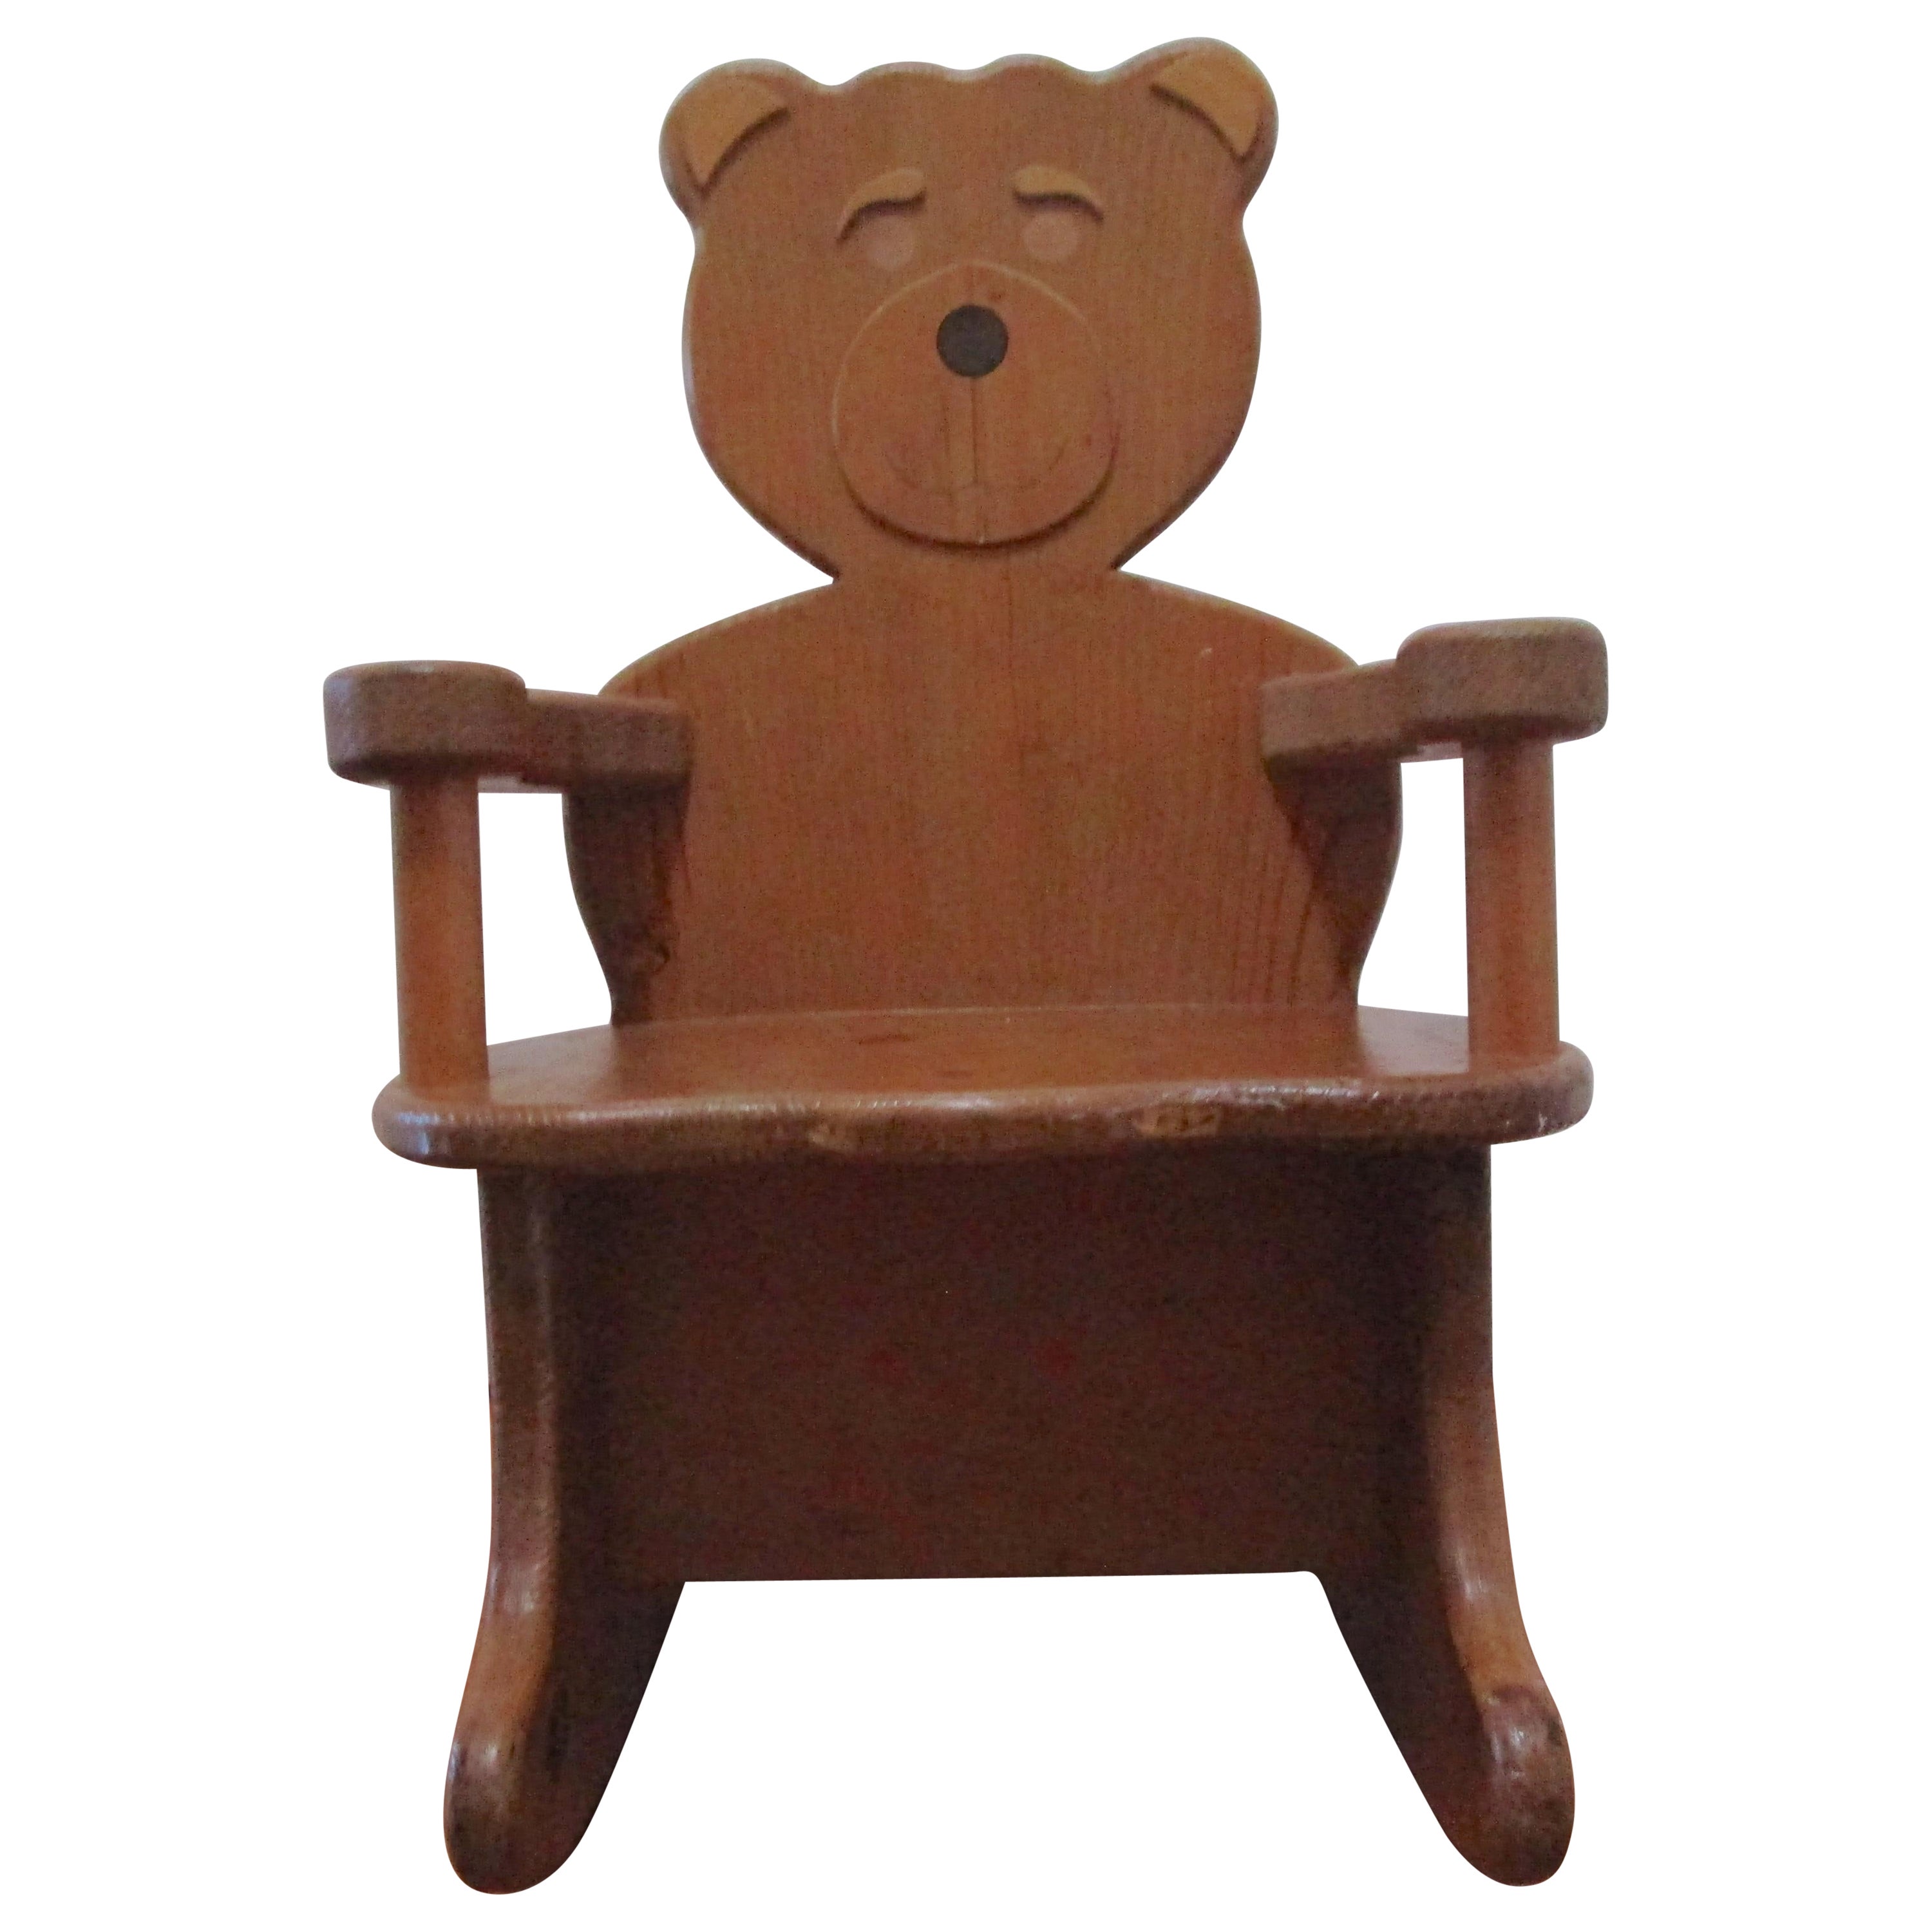 Vintage Hand Crafted Child's Teddy Bear Rocking Chair Stamped Tony Biele